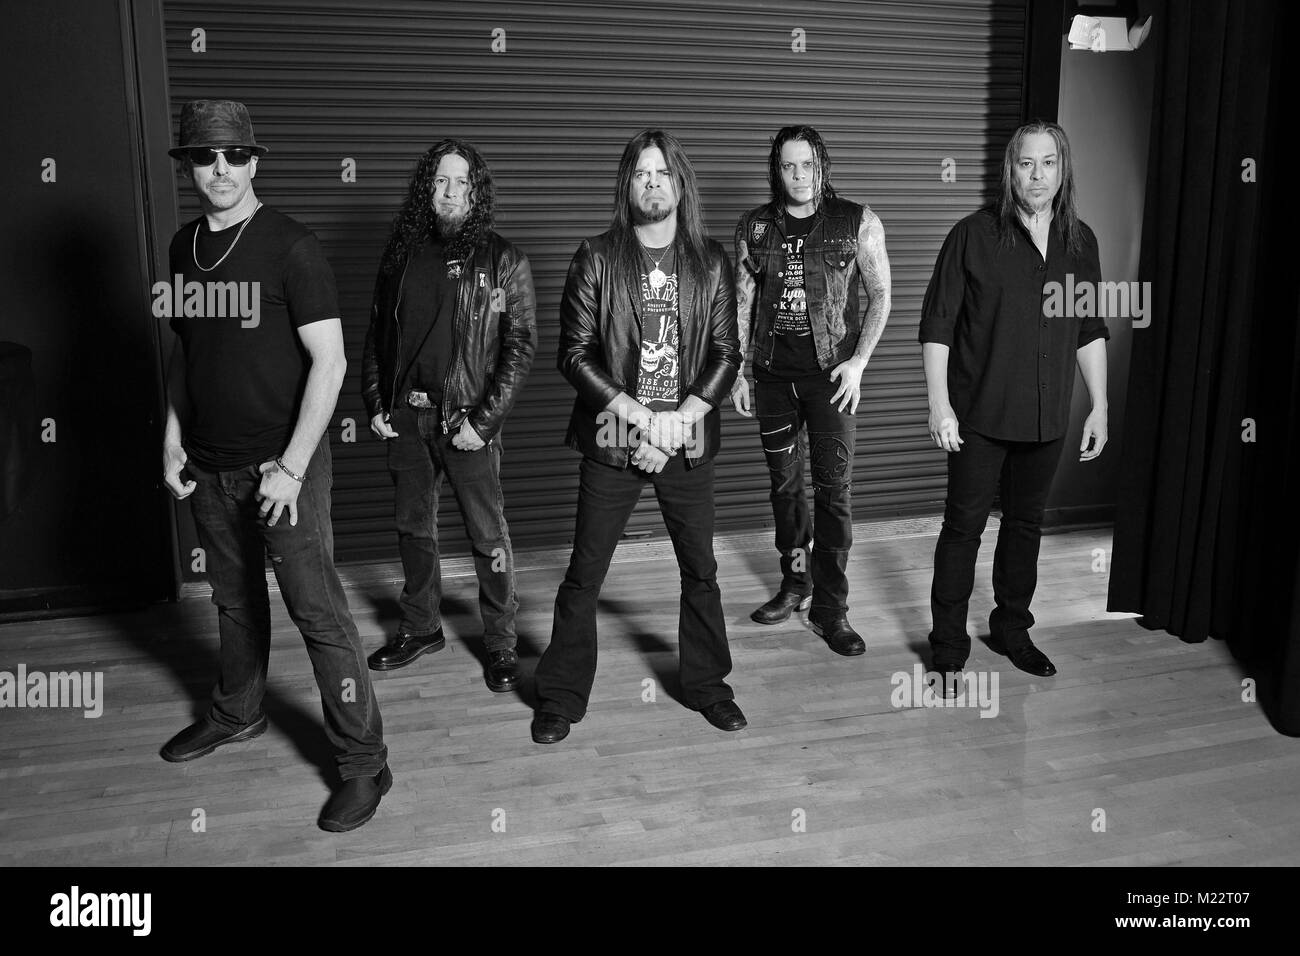 FORT LAUDERDALE, FL -MARCH 02: Scott Rockenfield, Michael Wilton, Todd La Torre, Parker Lundgre of Queensryche poses for a portrait at The Pompano Beach Amphitheater on March 2, 2016 in Fort Lauderdale, Florida.   People:  Scott Rockenfield, Michael Wilton, Todd La Torre, Parker Lundgre Stock Photo